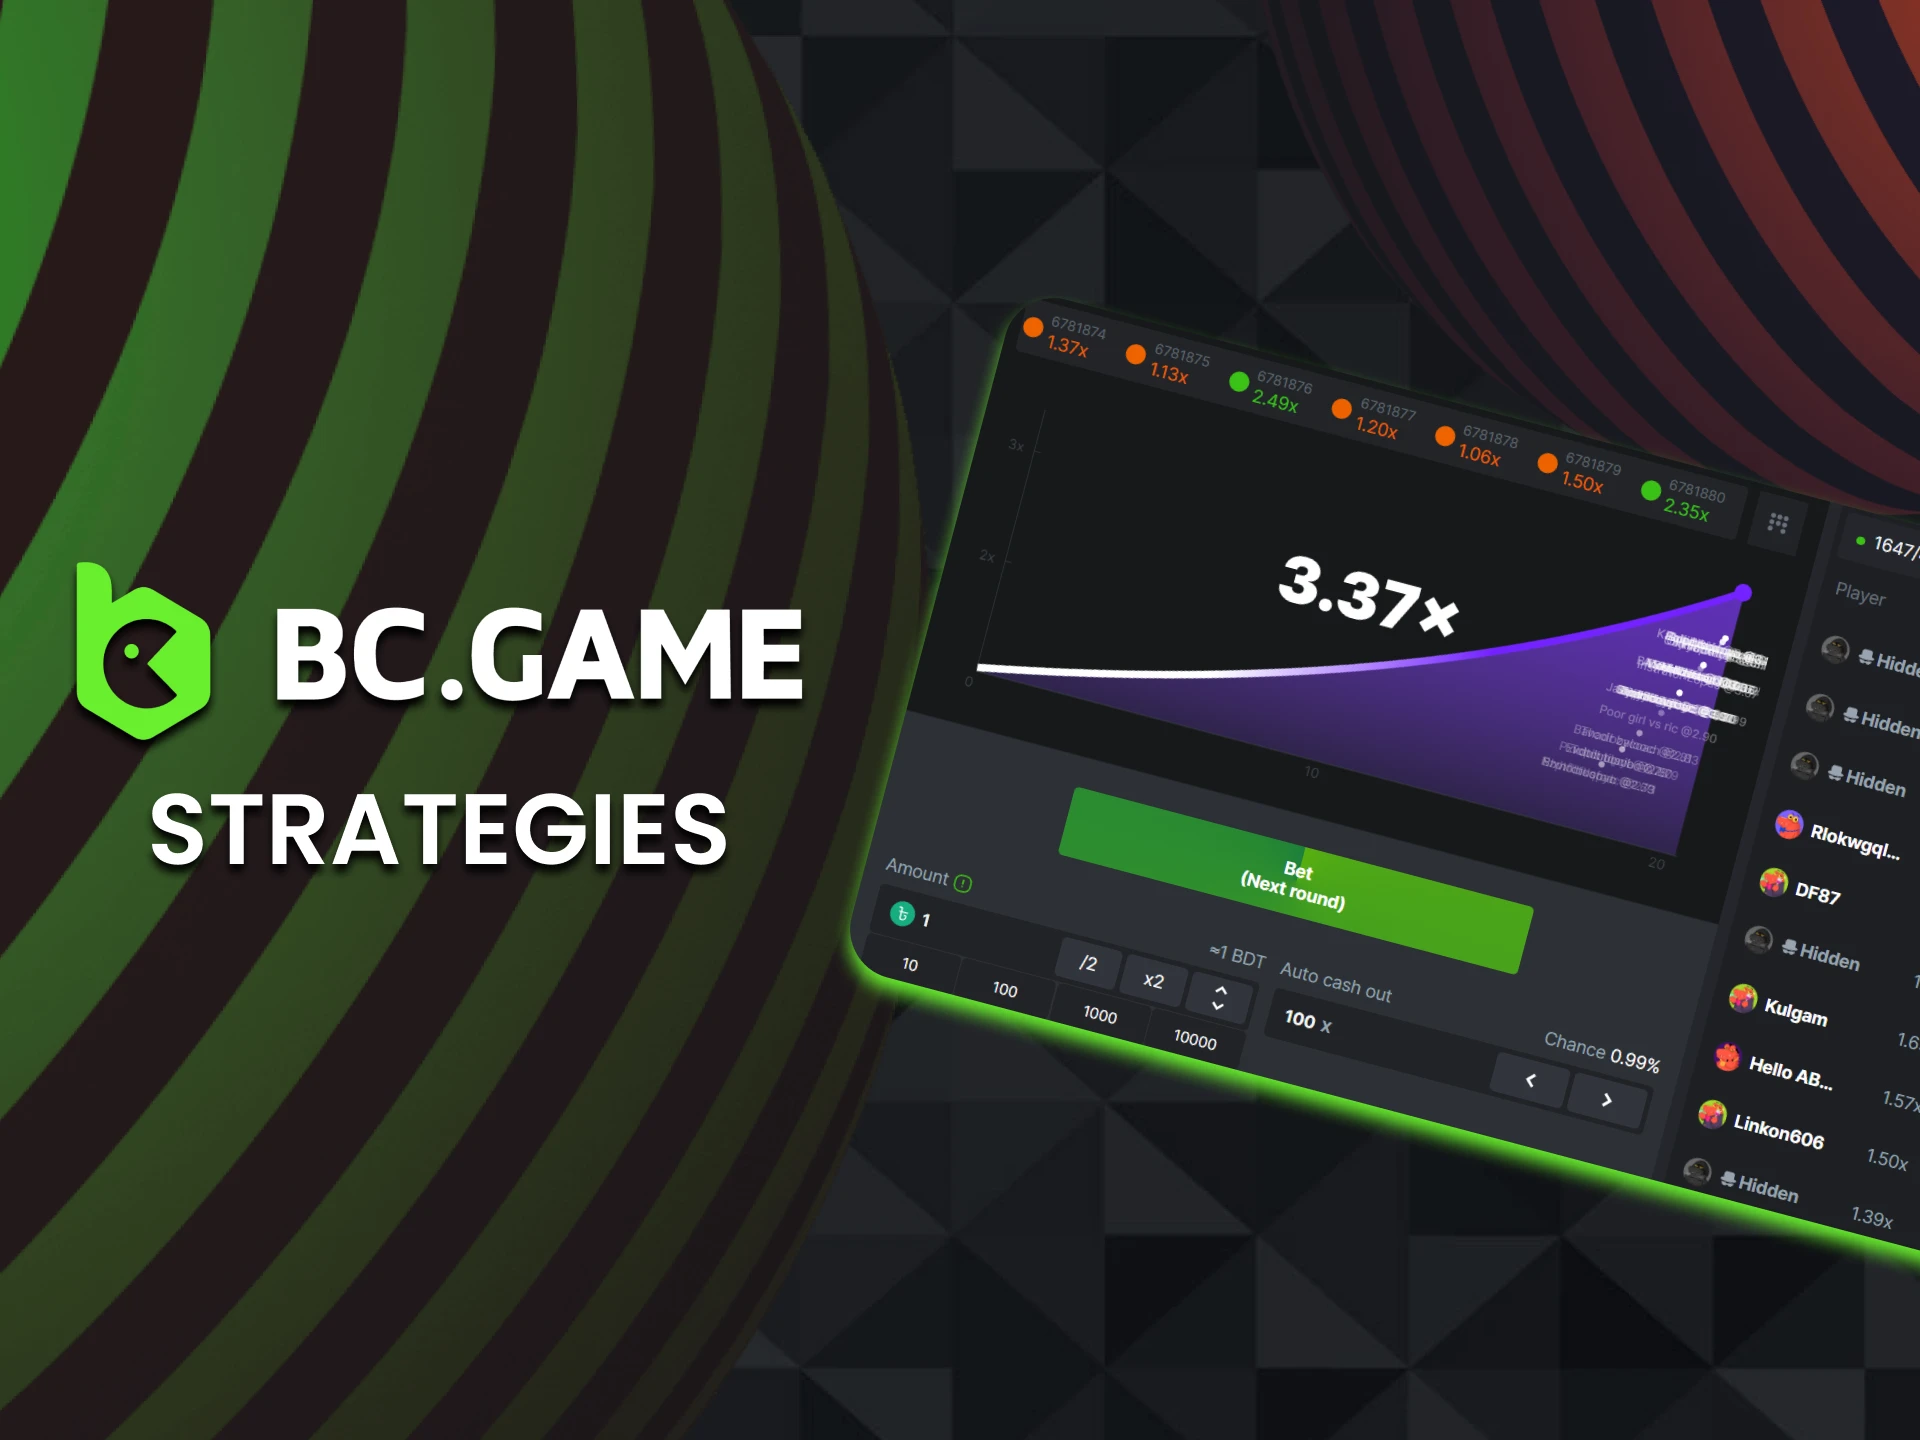 We will talk about strategies in crash games on BC Game online casino.